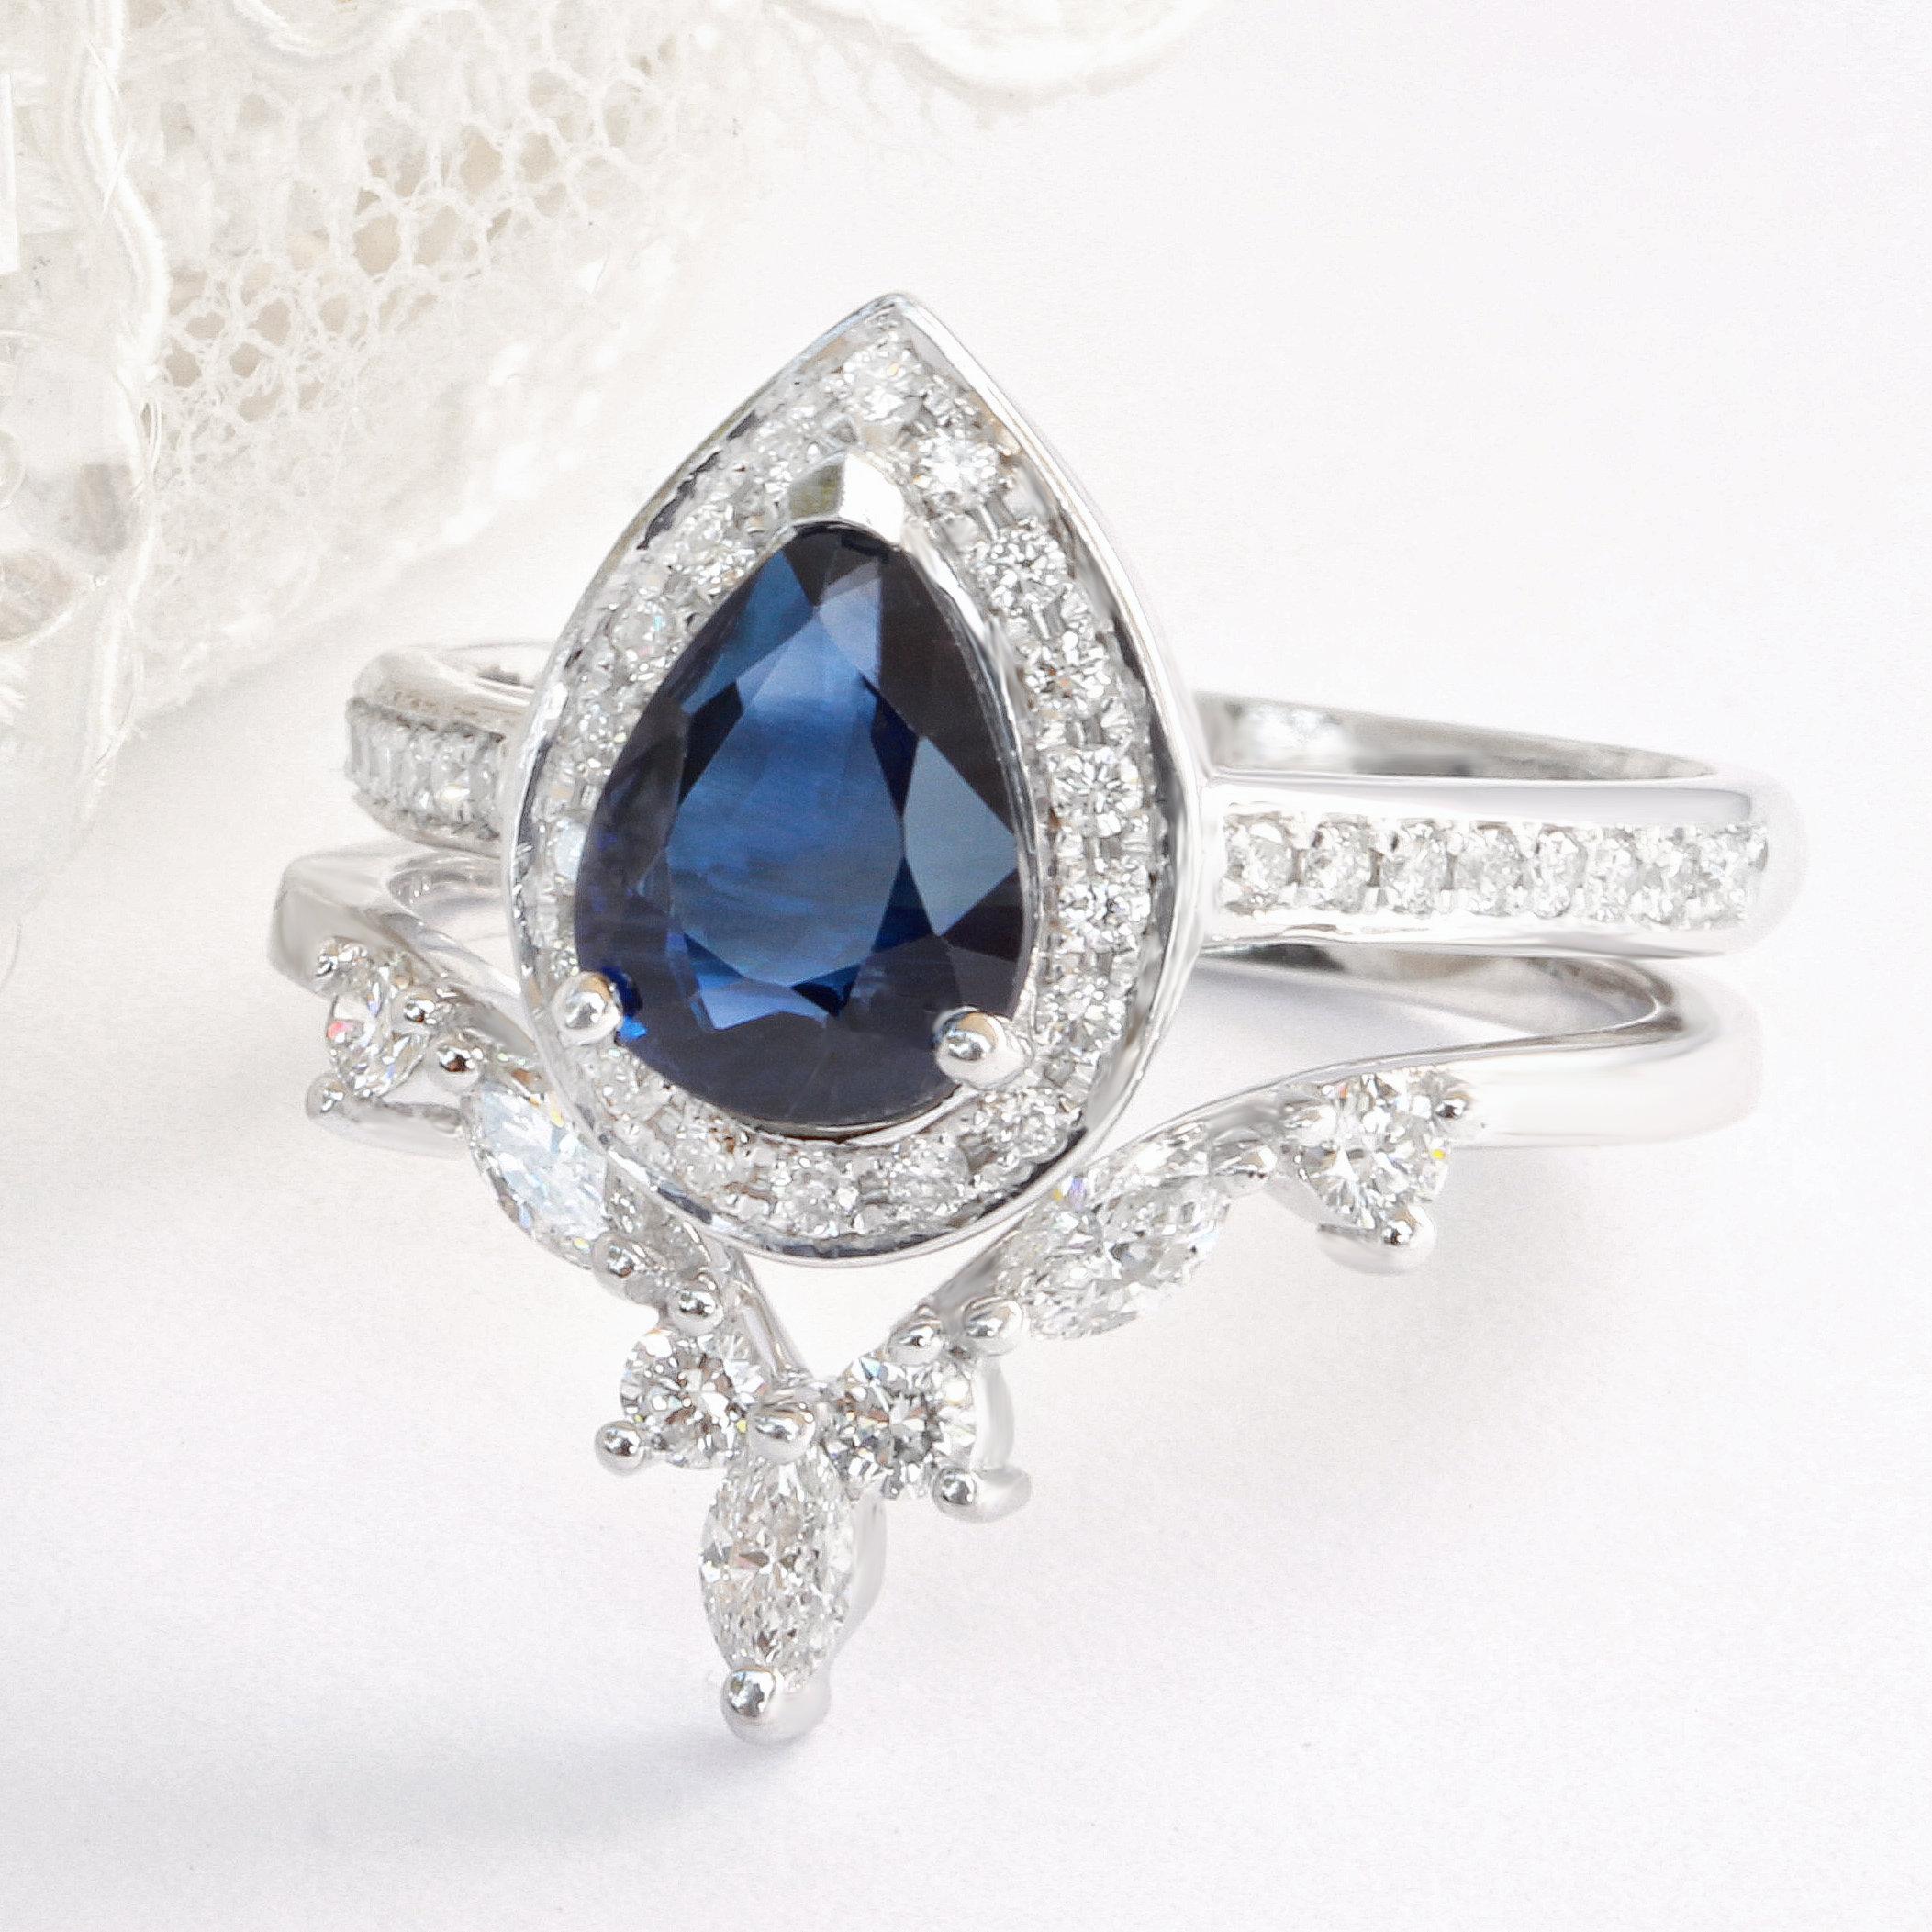 Royal and beautiful Blue Sapphire Pear Shape & Diamonds Wedding Rings Set.
The center stone can be customized.
The list is for a two ring set.
Handmade with care. 
An original design by Silly Shiny Diamonds. 

Details: 
* Center Stone Shape: Pear